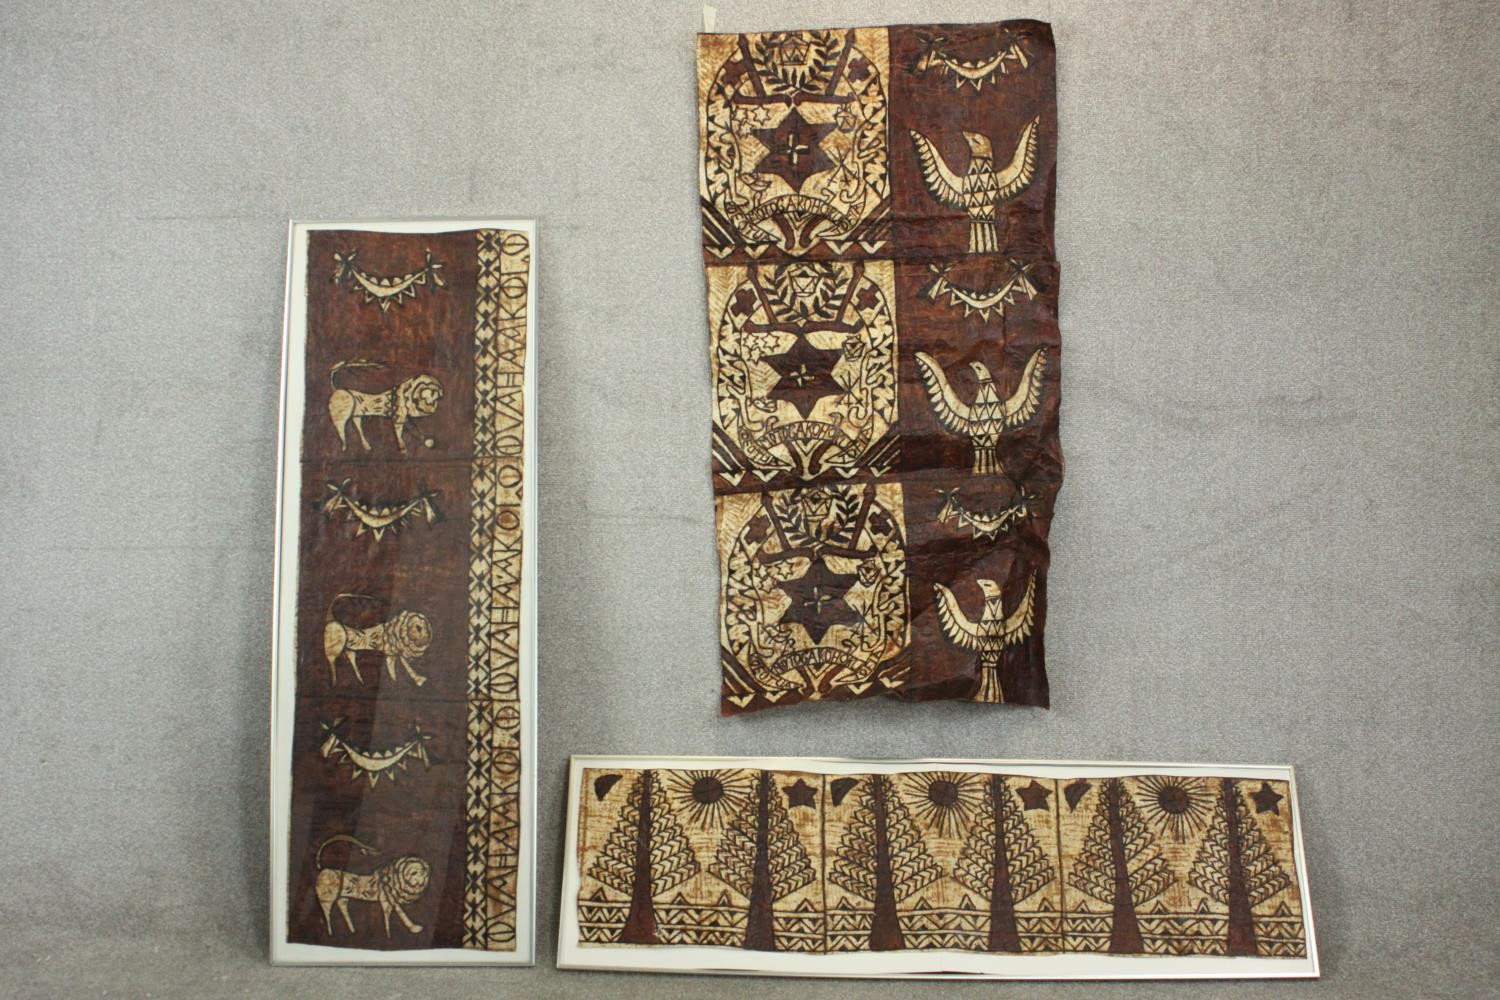 Two large Tonganese Tapa cloth wall hangings, one depicting animals and one depicting stylised trees